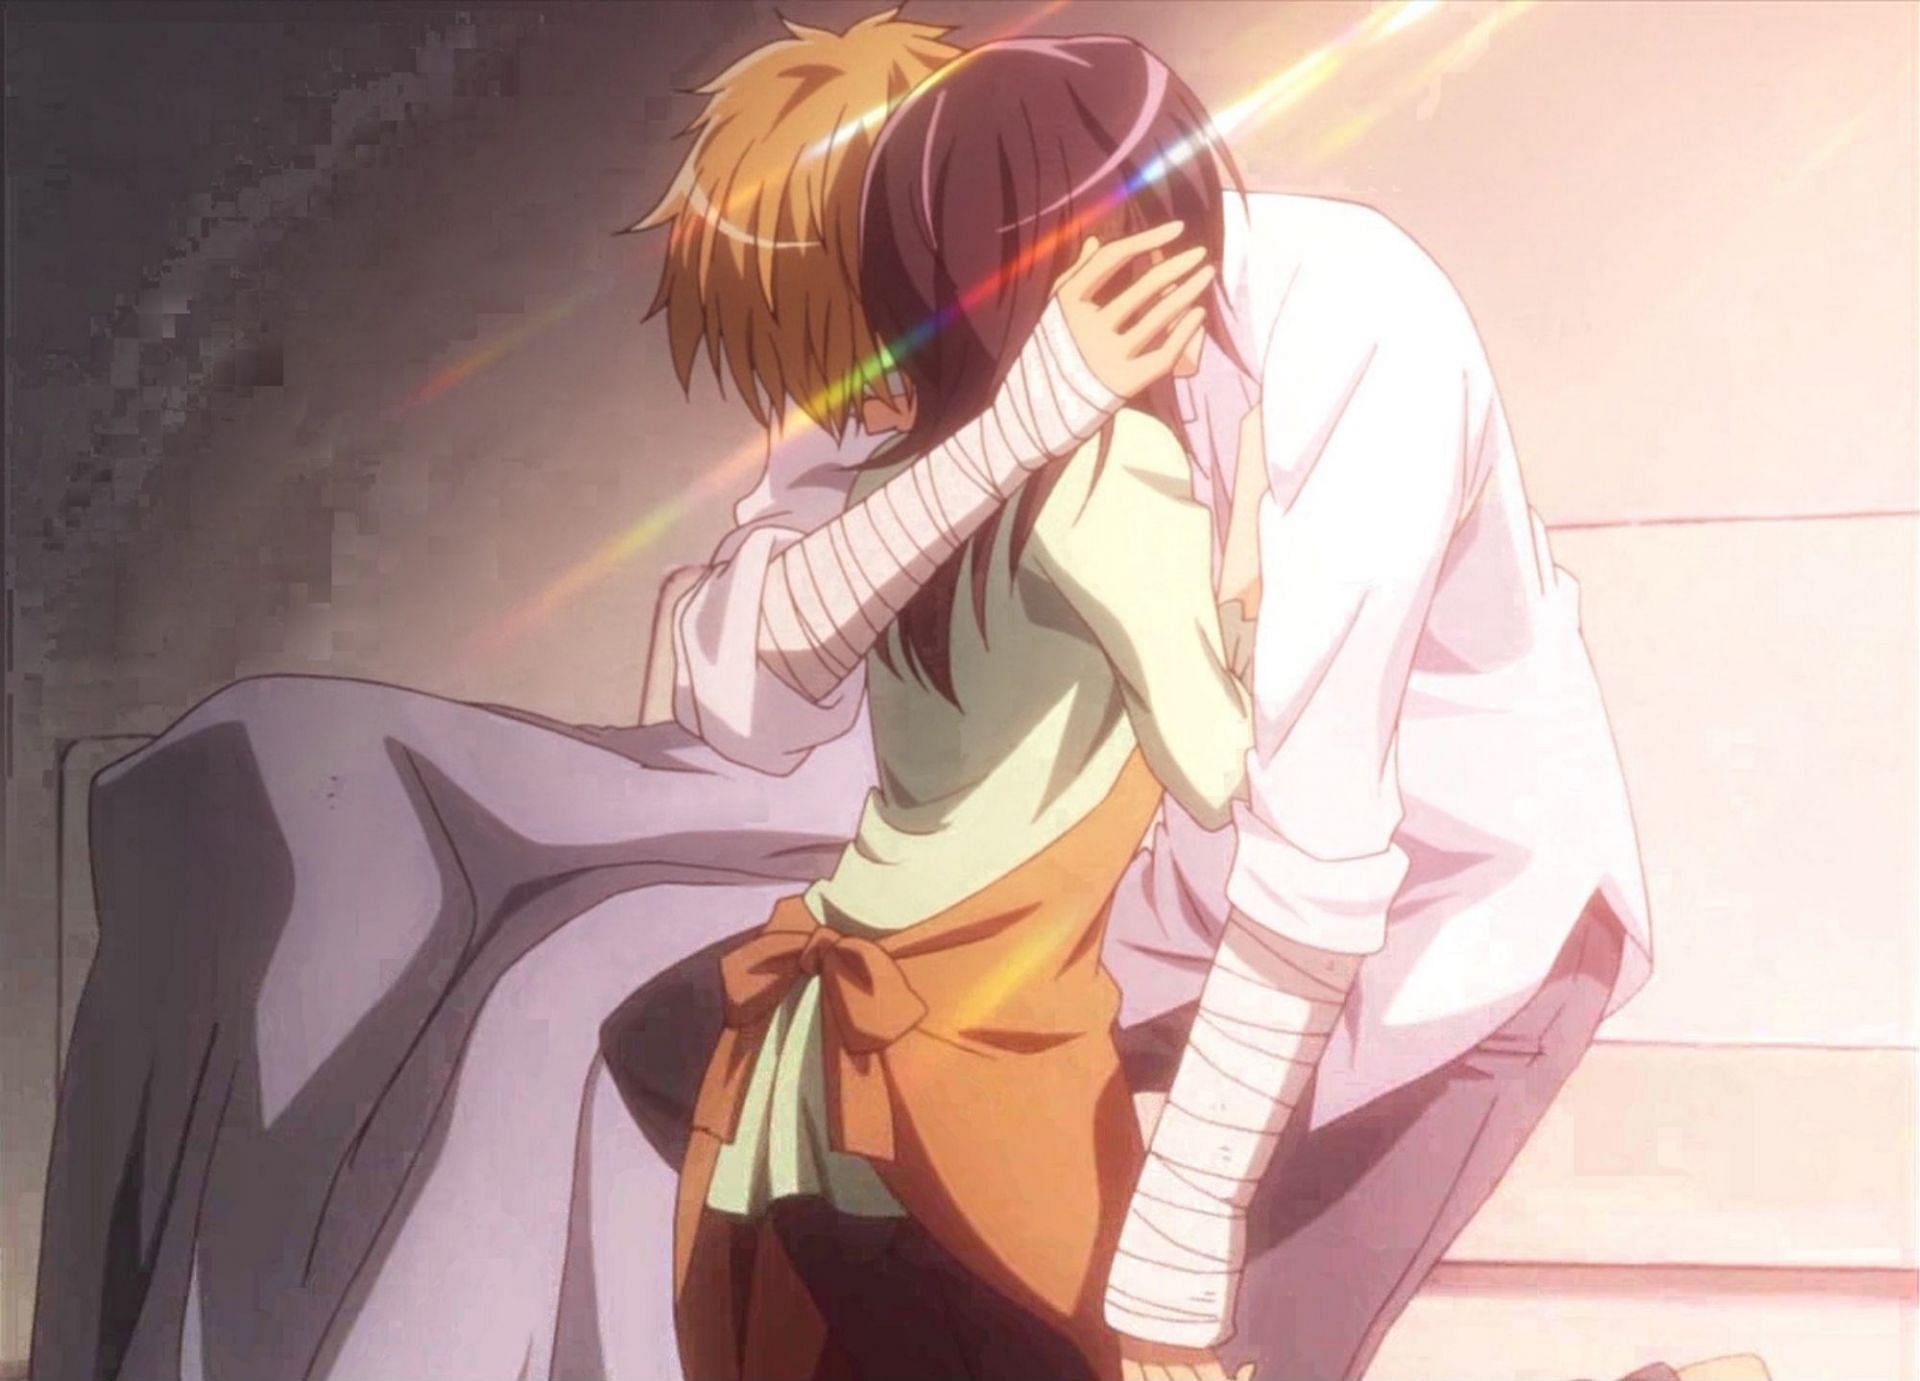 10. "Usui and Misaki from Maid Sama!" - wide 5